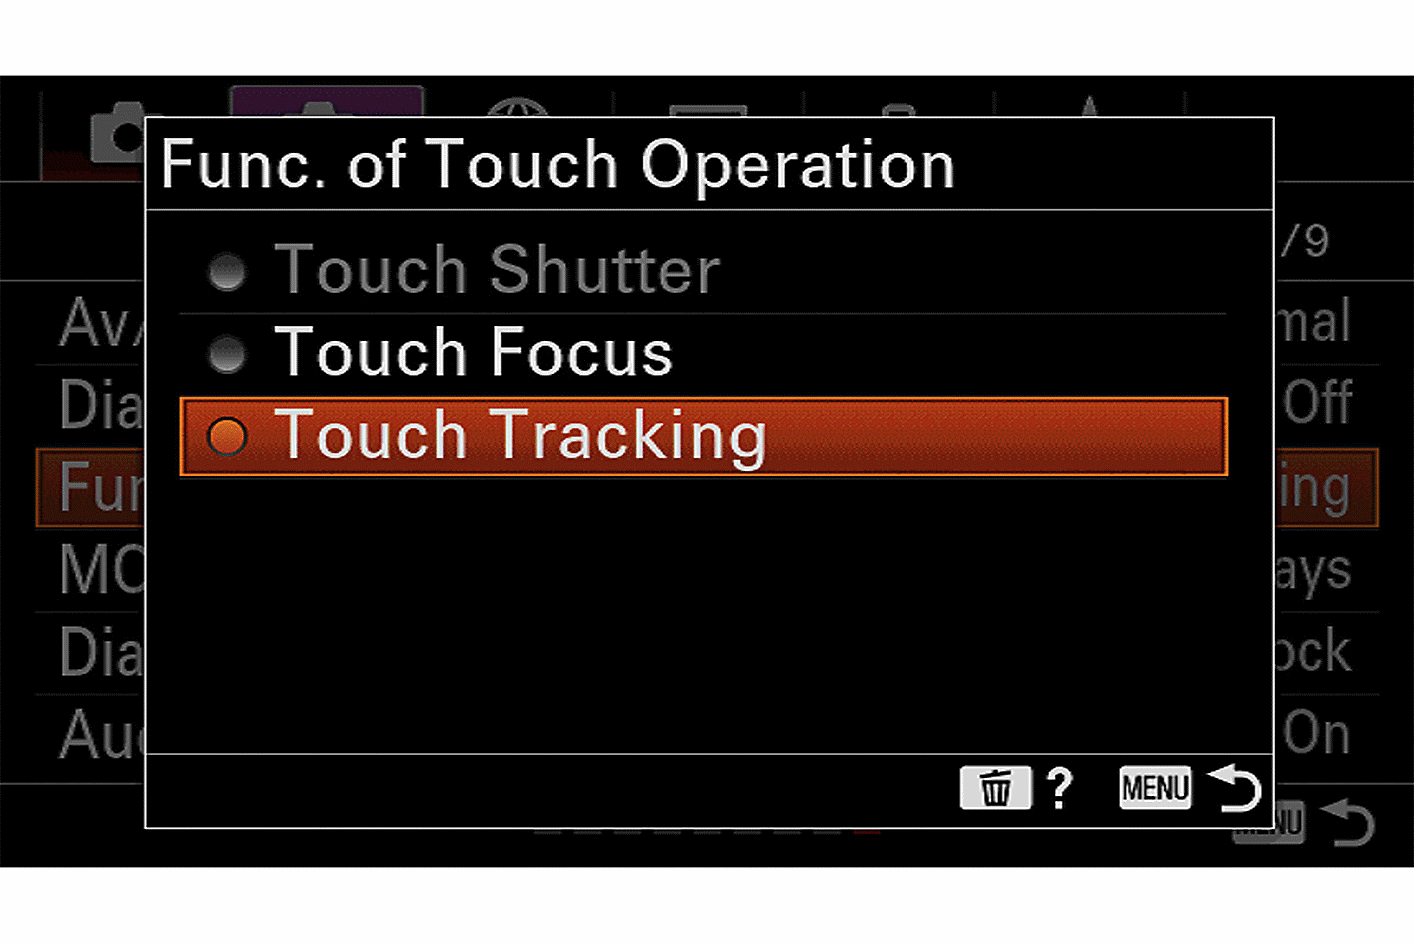 Touch Tracking turns on Real-time Tracking at any time